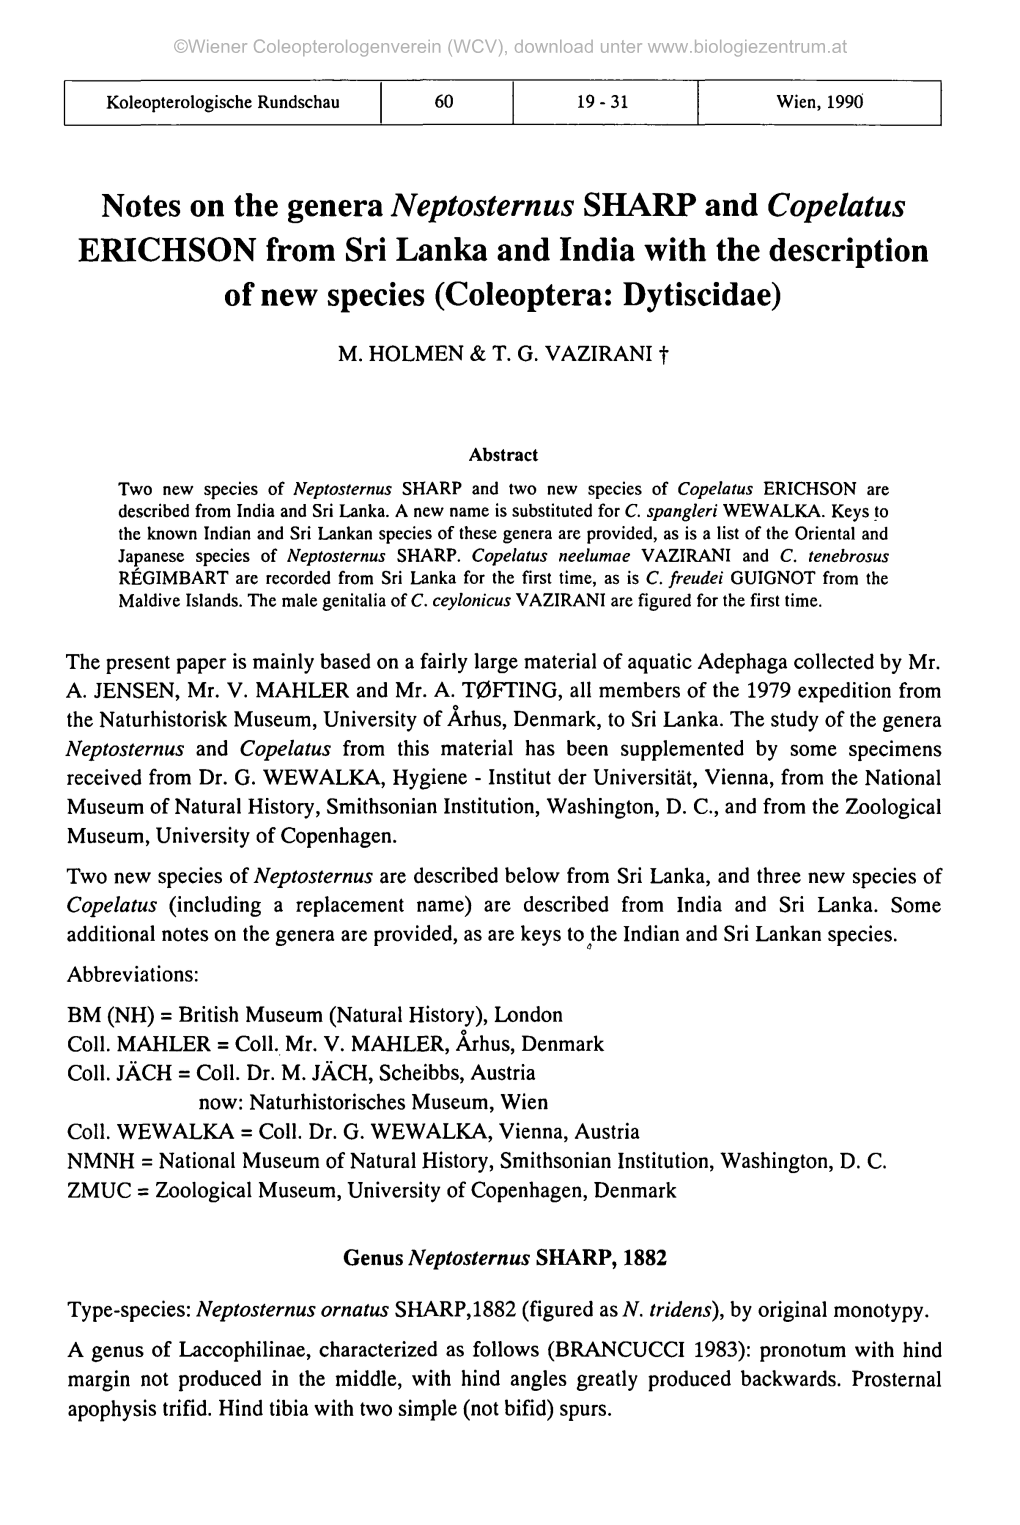 Notes on the Genera Neptosternus SHARP and Copelatus ERICHSON from Sri Lanka and India with the Description of New Species (Coleoptera: Dytiscidae)